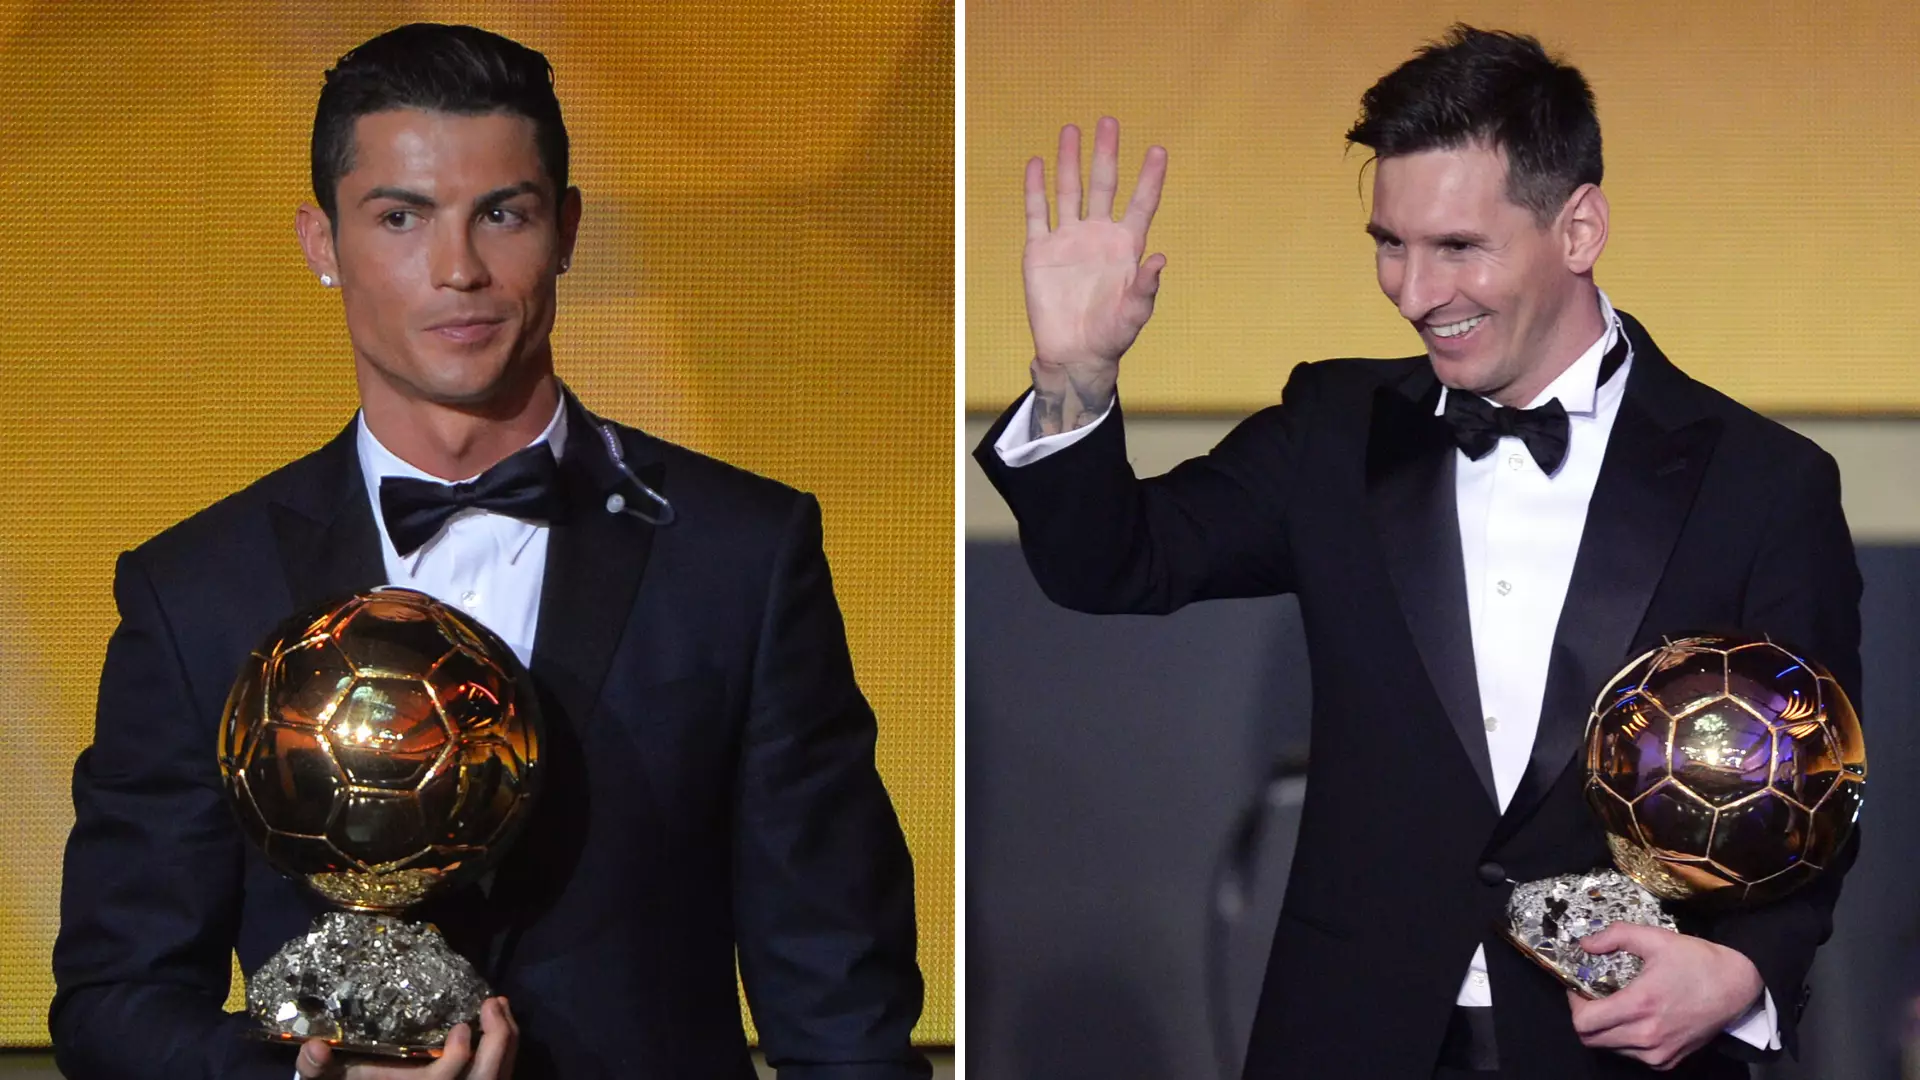 FIFA 20 Predicts Every Ballon d'Or Winner From 2019 To 2033